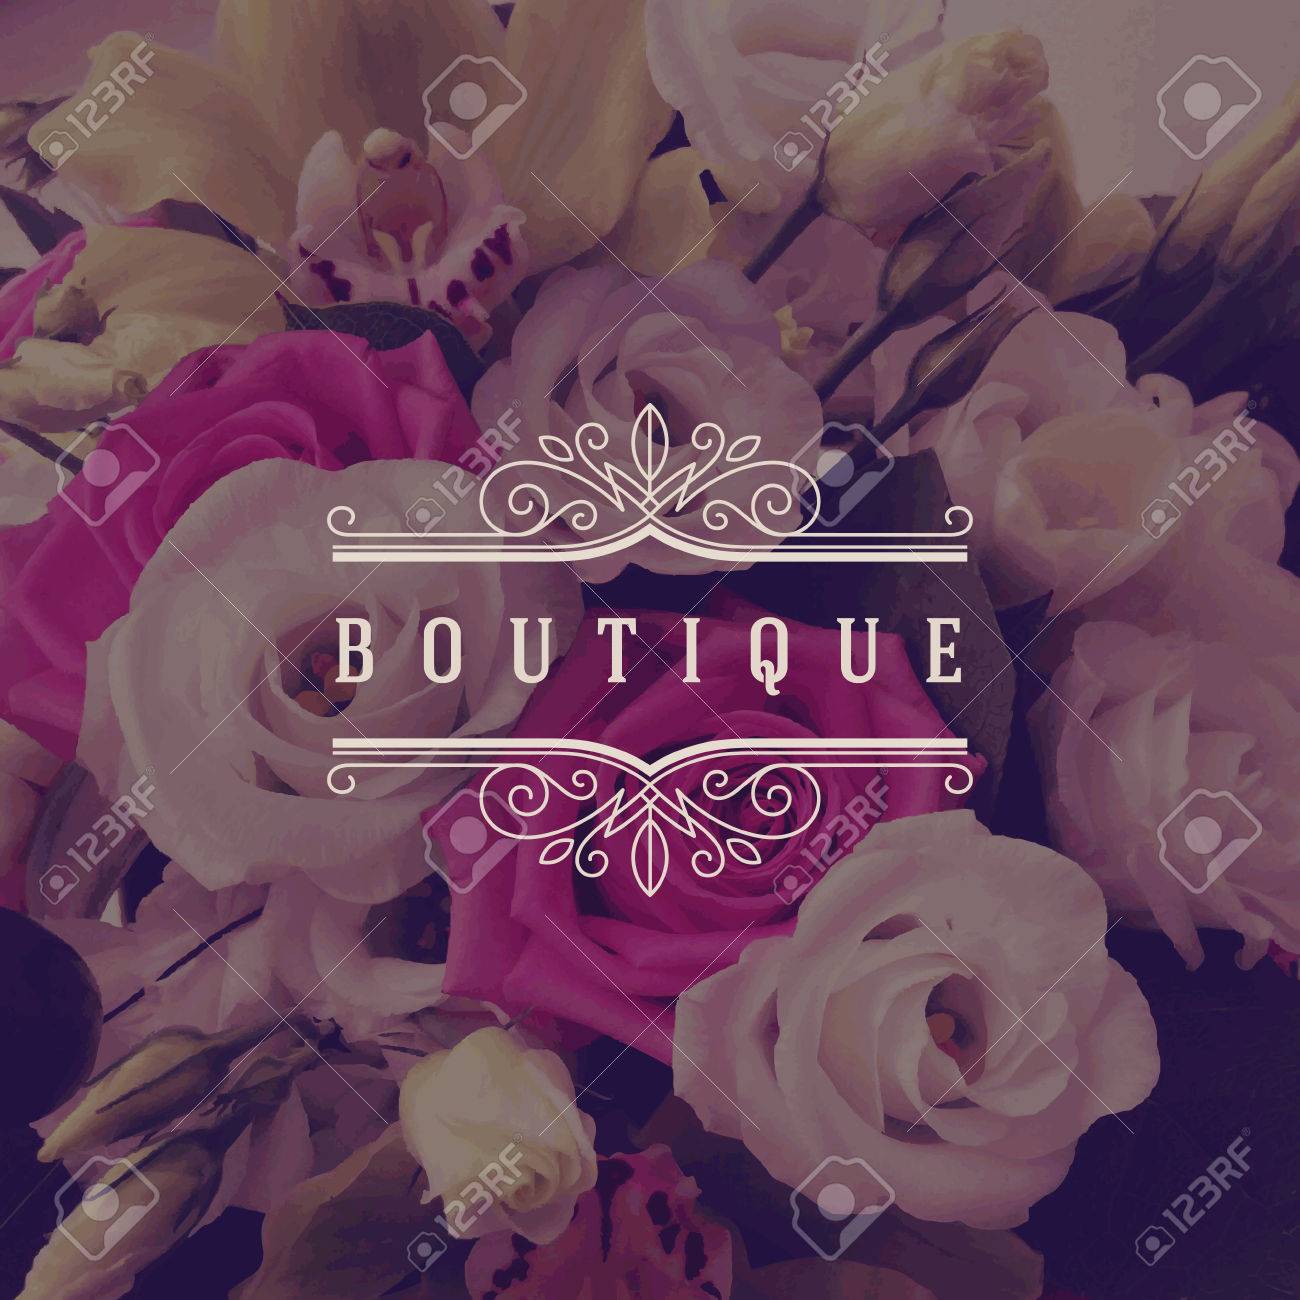 Vector Illustration Boutique Template With Flourishes